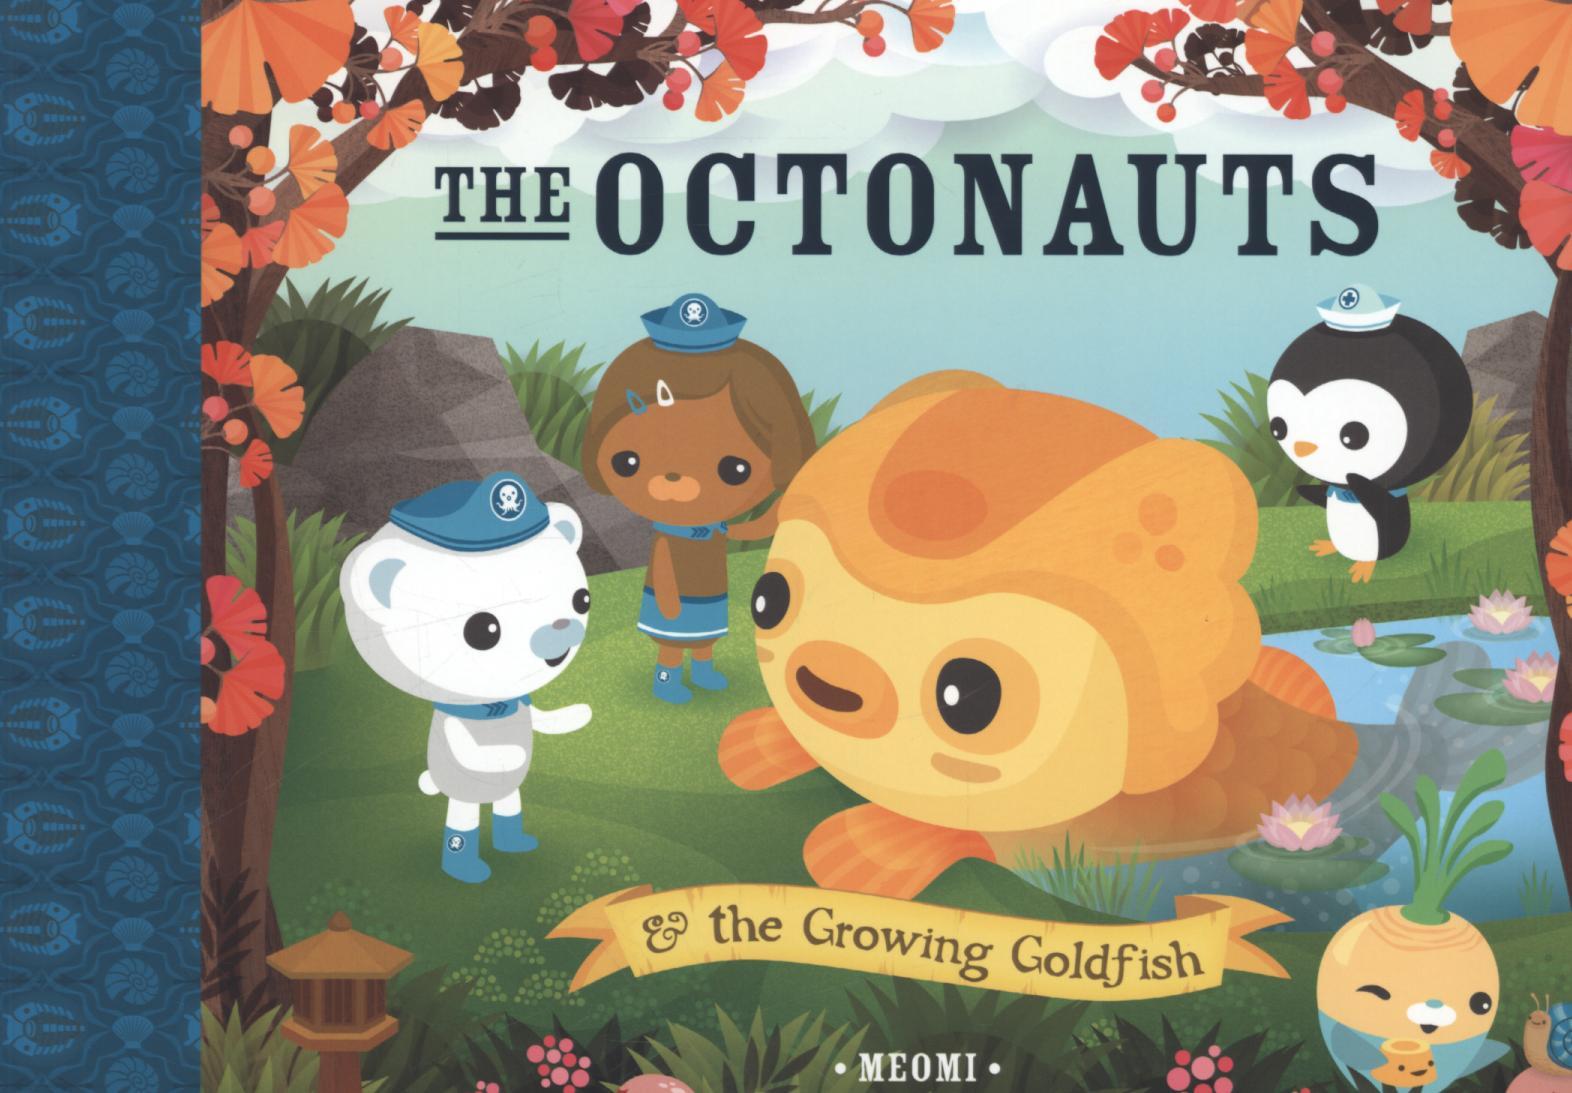 Octonauts and the Growing Goldfish